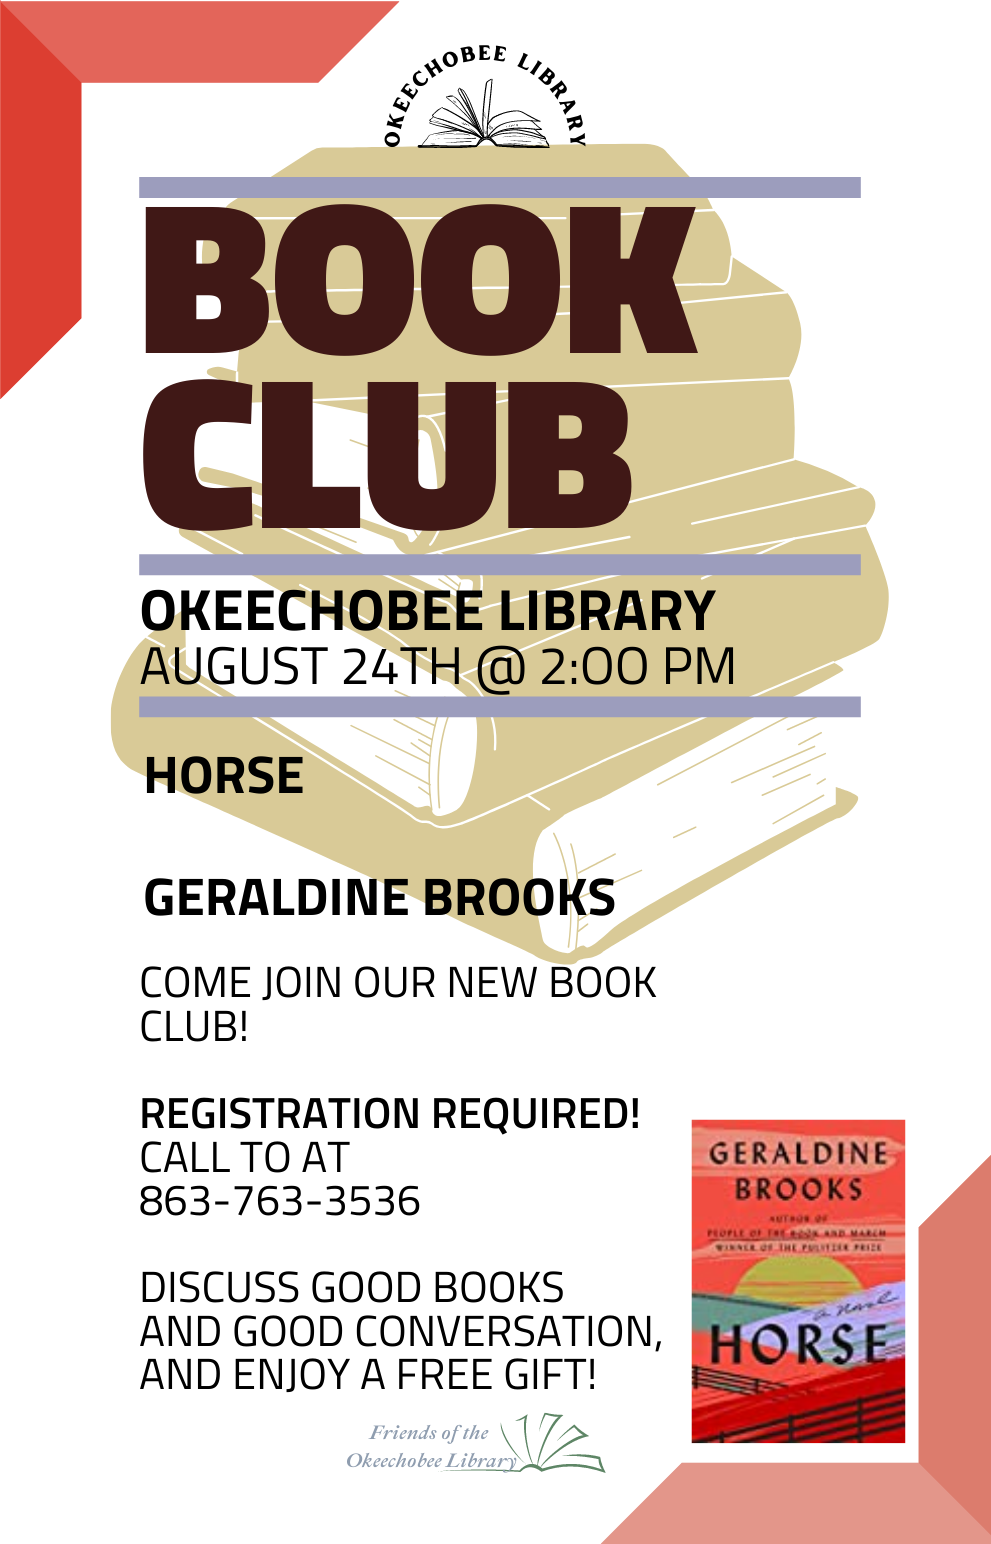 This month we will be discussing 'Horse' by Geraldine Brooks. Also every month we have a small FREE gift bag for attendees